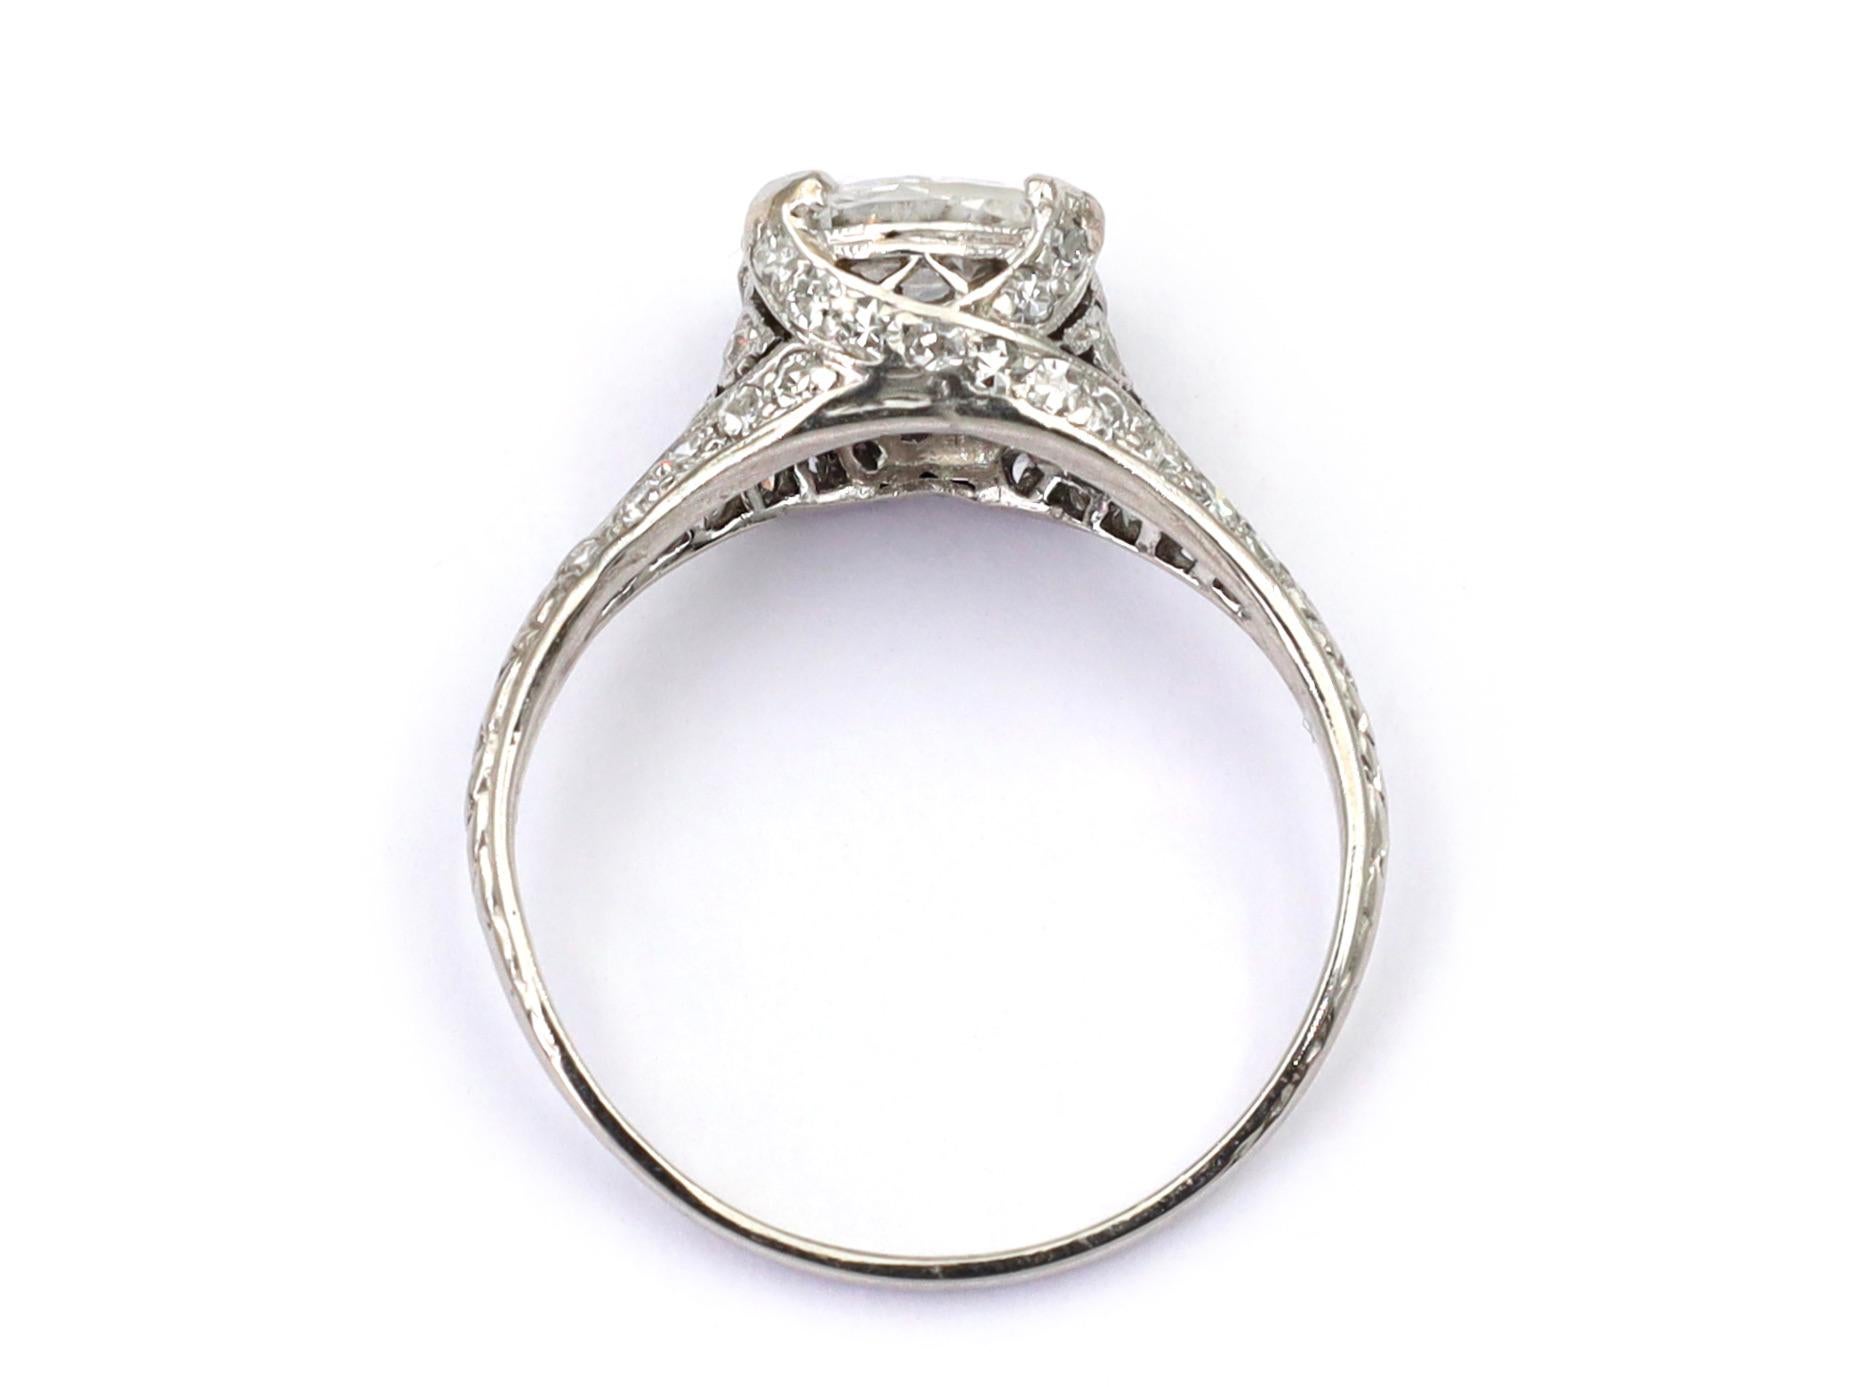 Old European Cut Edwardian GIA Certified 1.22ct Diamond Solitaire Engagement Ring in Platinum